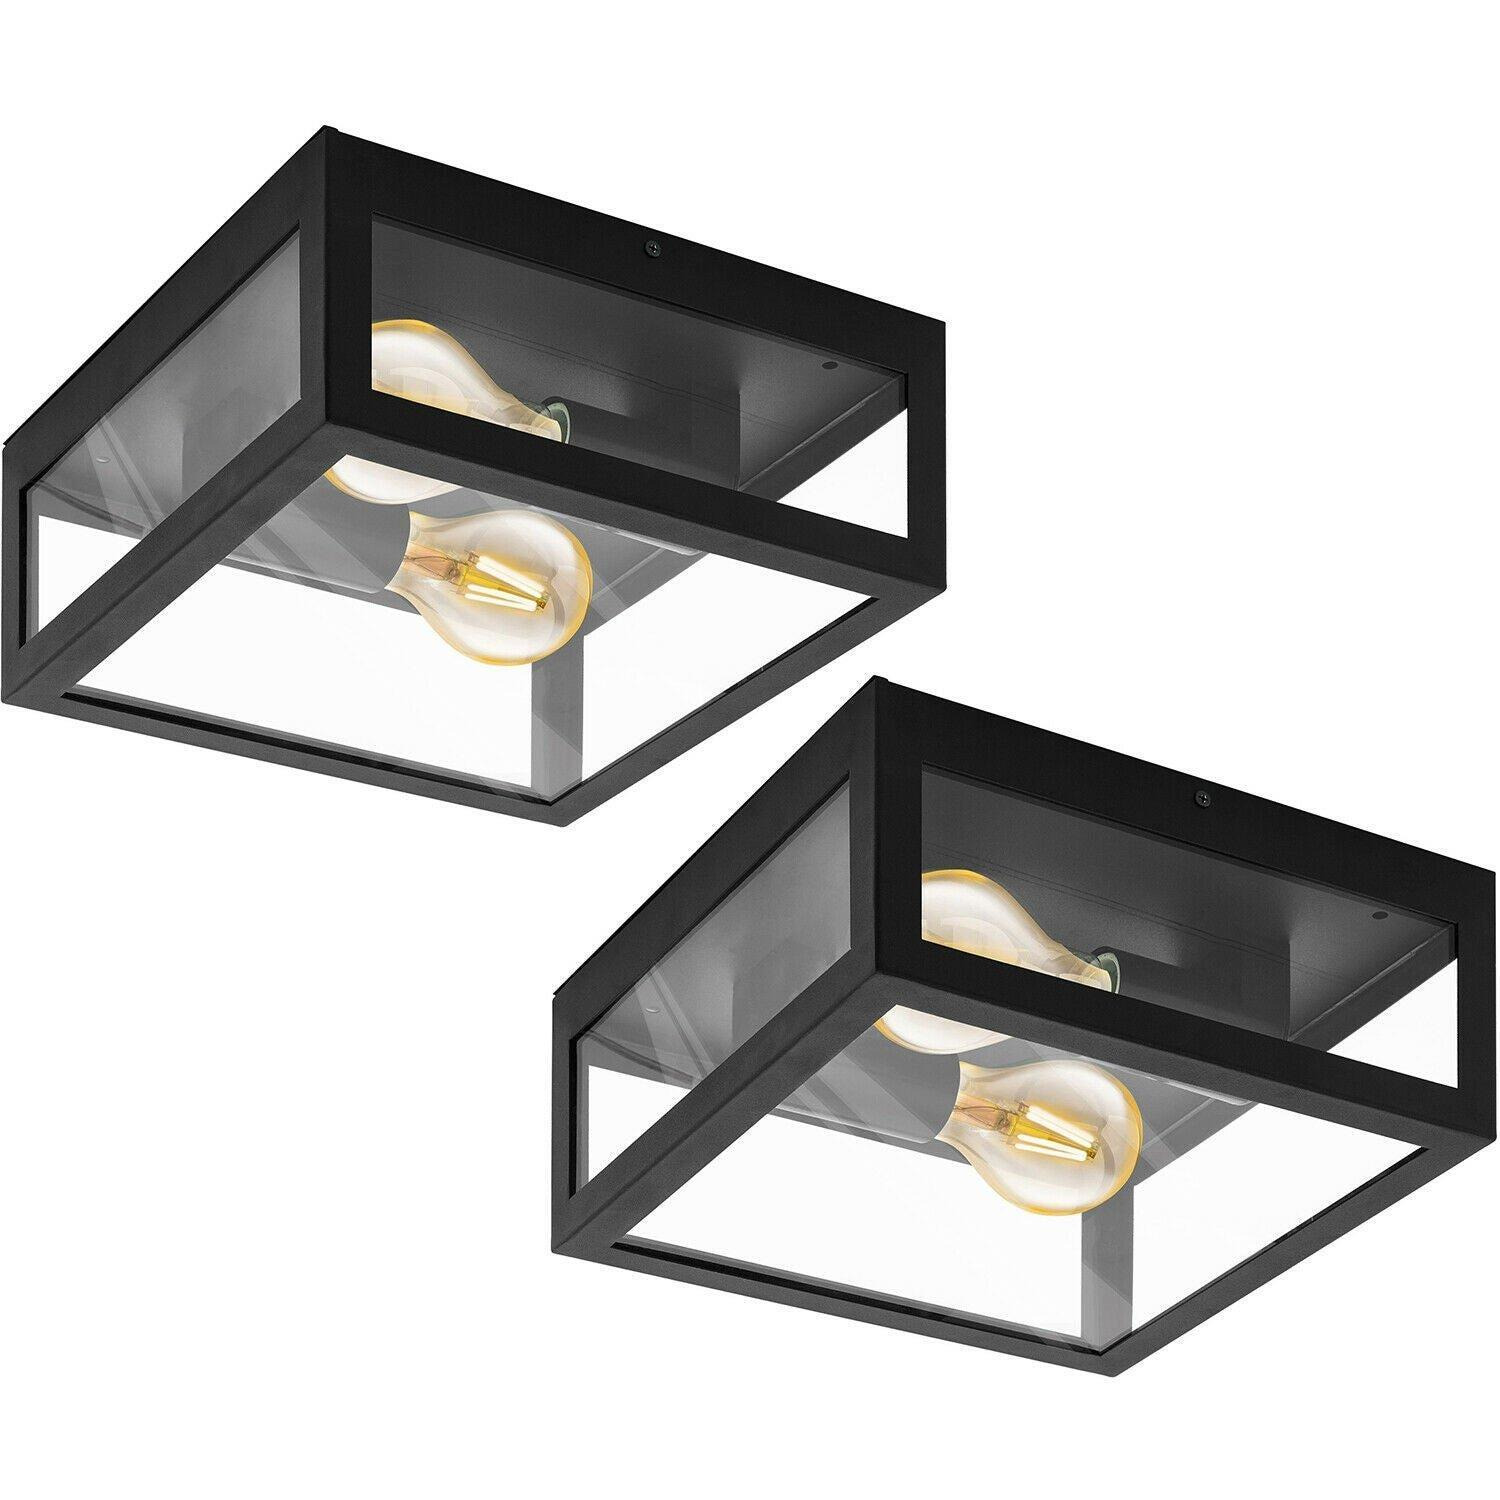 2 PACK IP44 Outdoor Wall Light Black & Glass Box Twin 60W E27 Porch Lamp - image 1